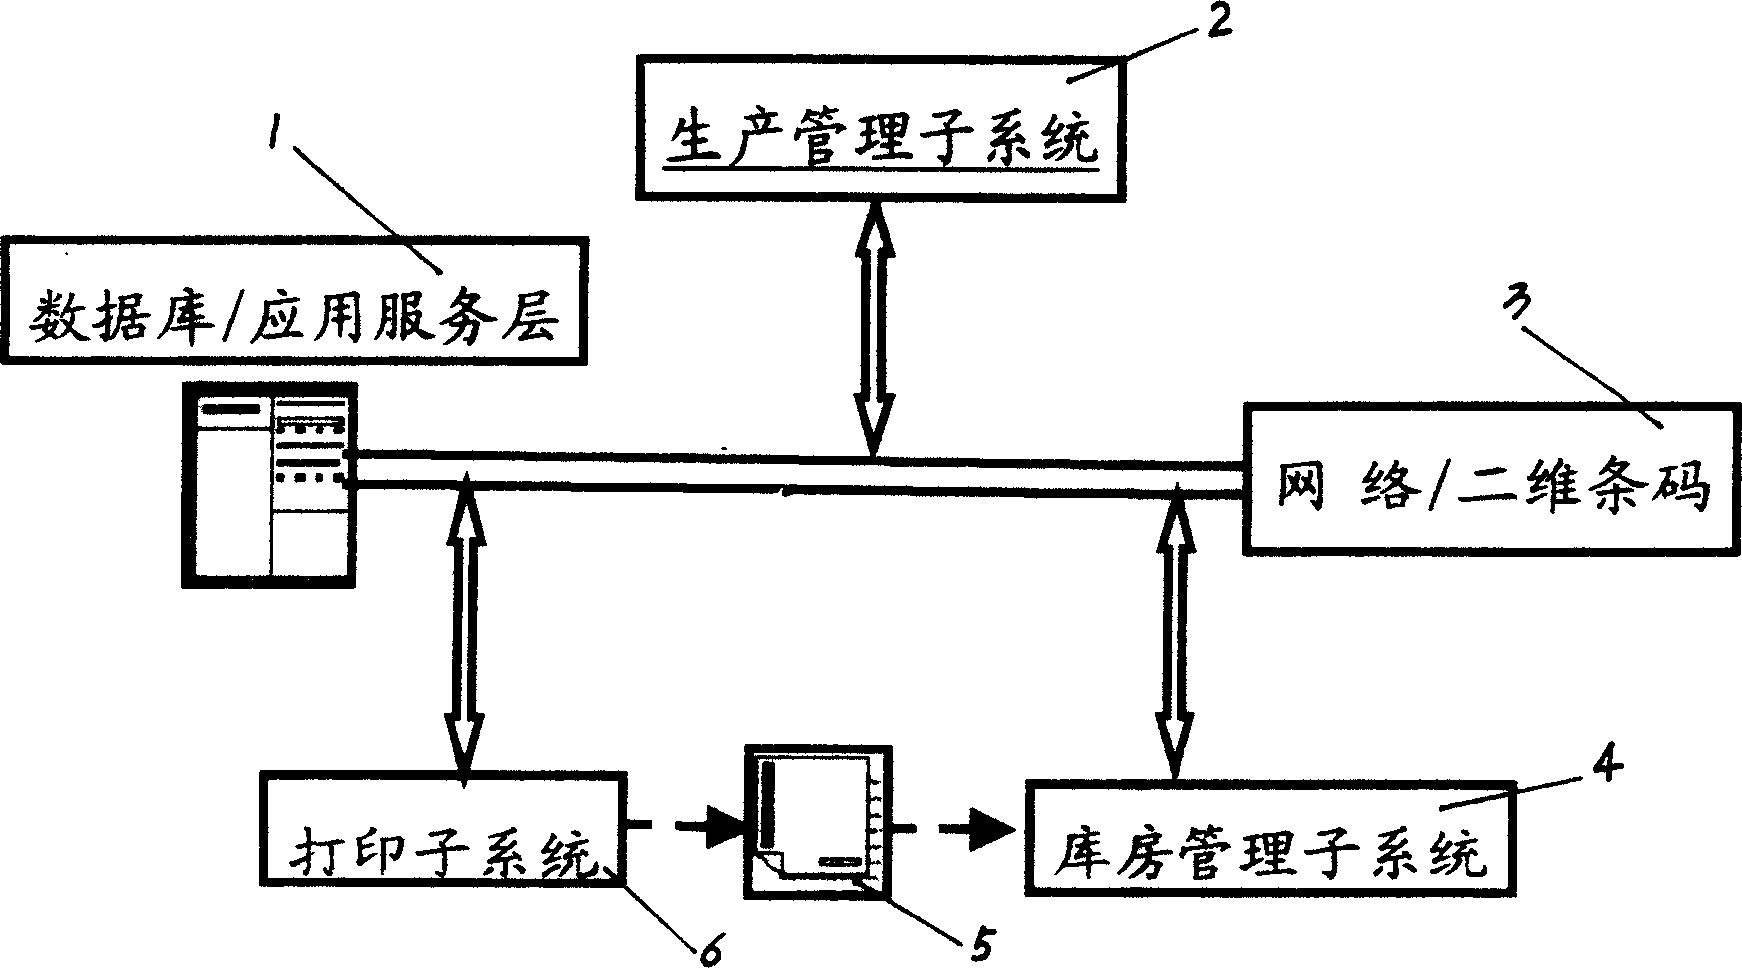 Currency packaging box external mark, scanning hand terminal, currency information two dimensional bar code management system